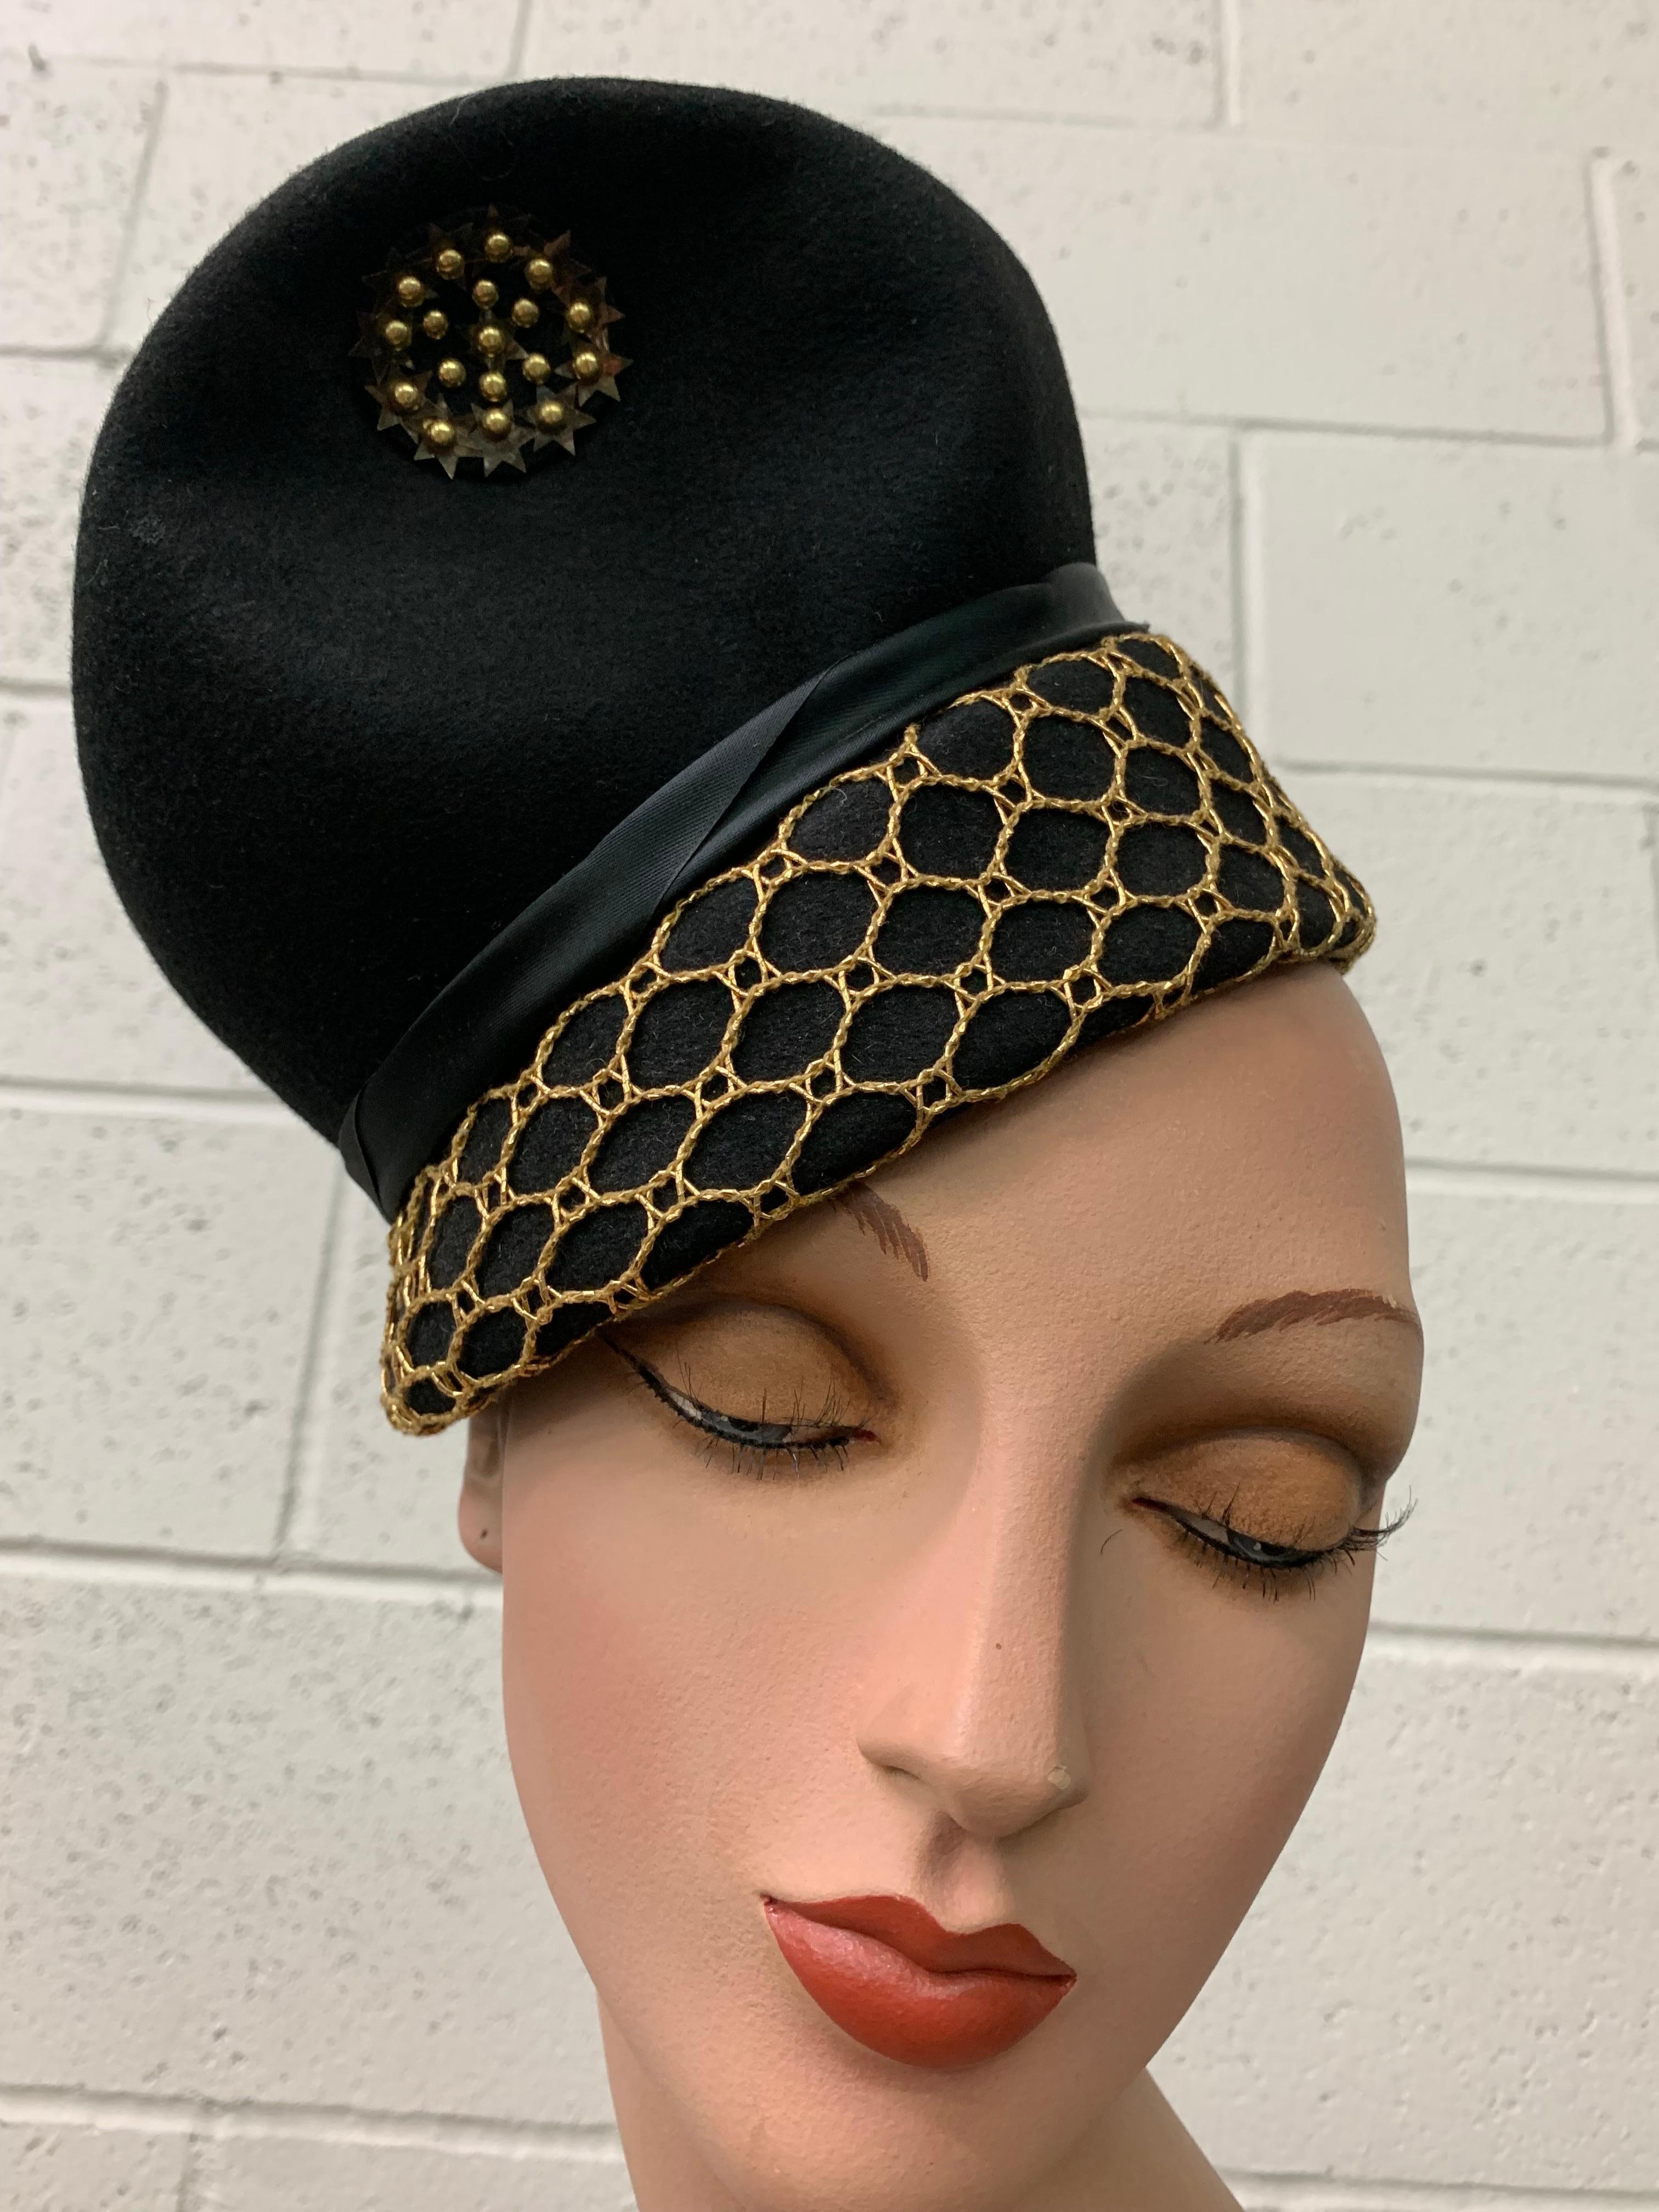 1940s Black Felt Surrealist Shape Hat w Gold Netting, Sequin Medallion & Black Silk Bow. Elastic band at back to be anchored in hairstyle. One Size, Adjustable. 